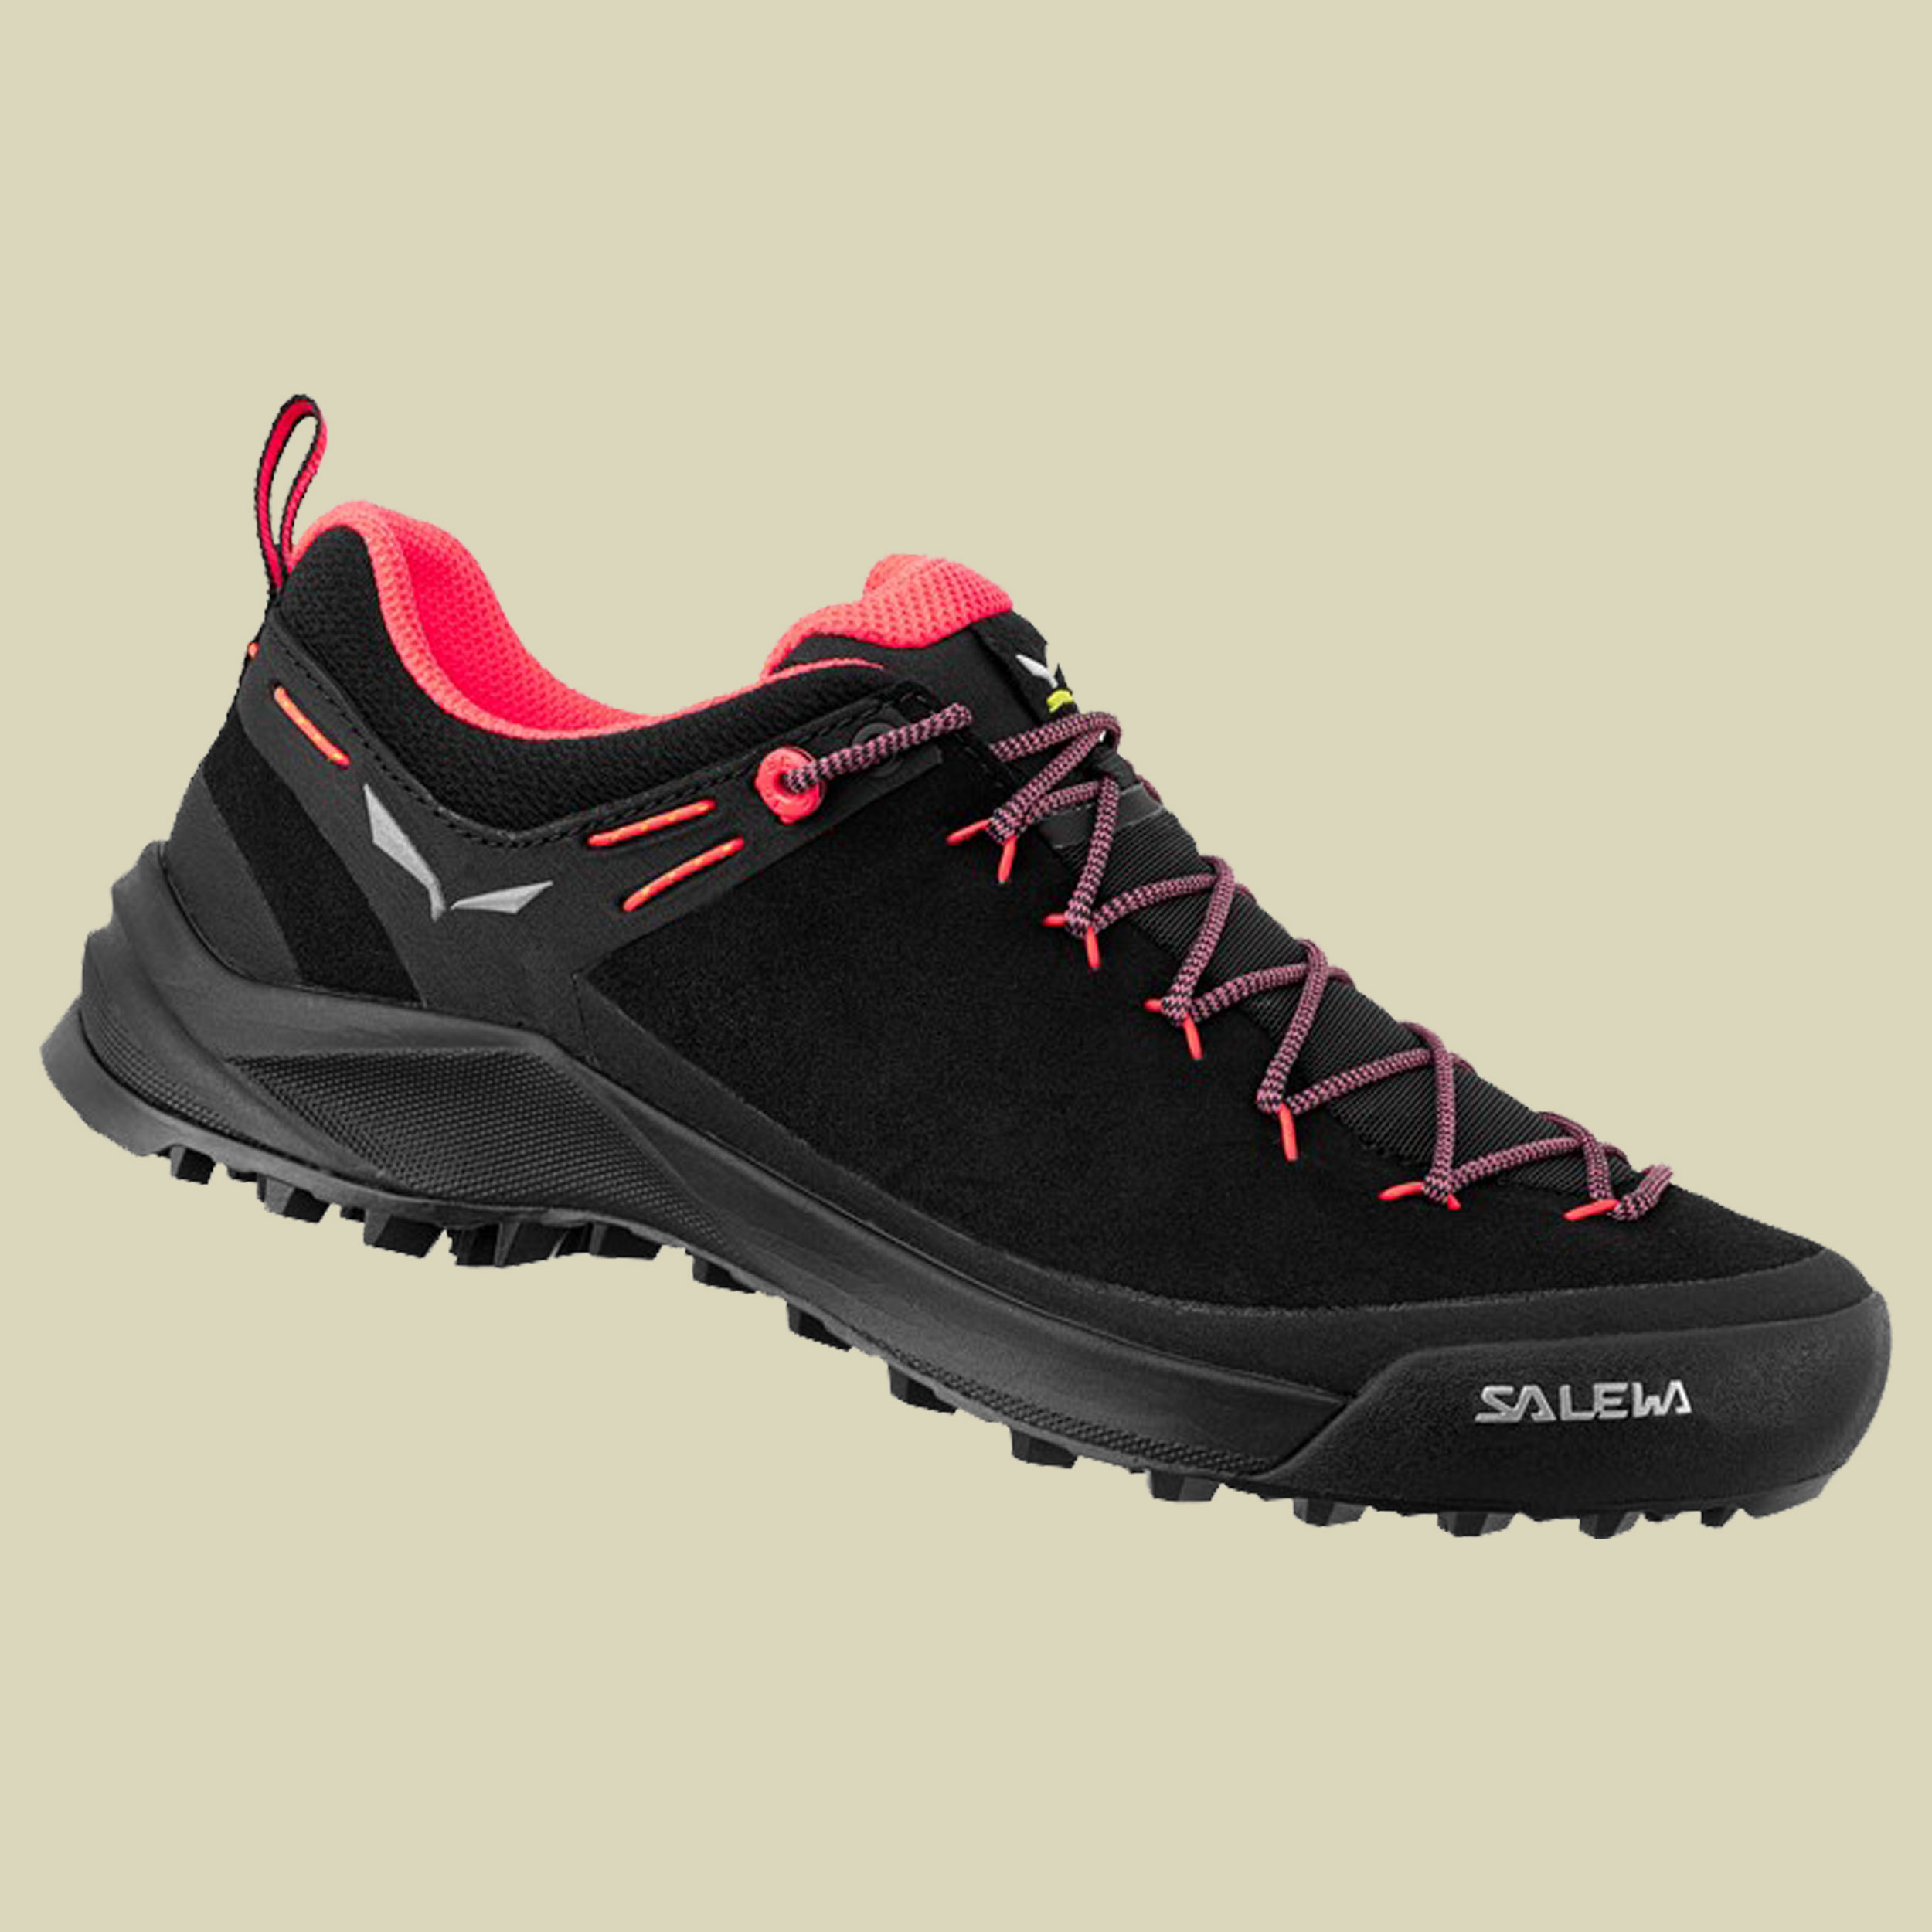 WS Wildfire Leather Größe UK 7 Farbe black/fluo coral